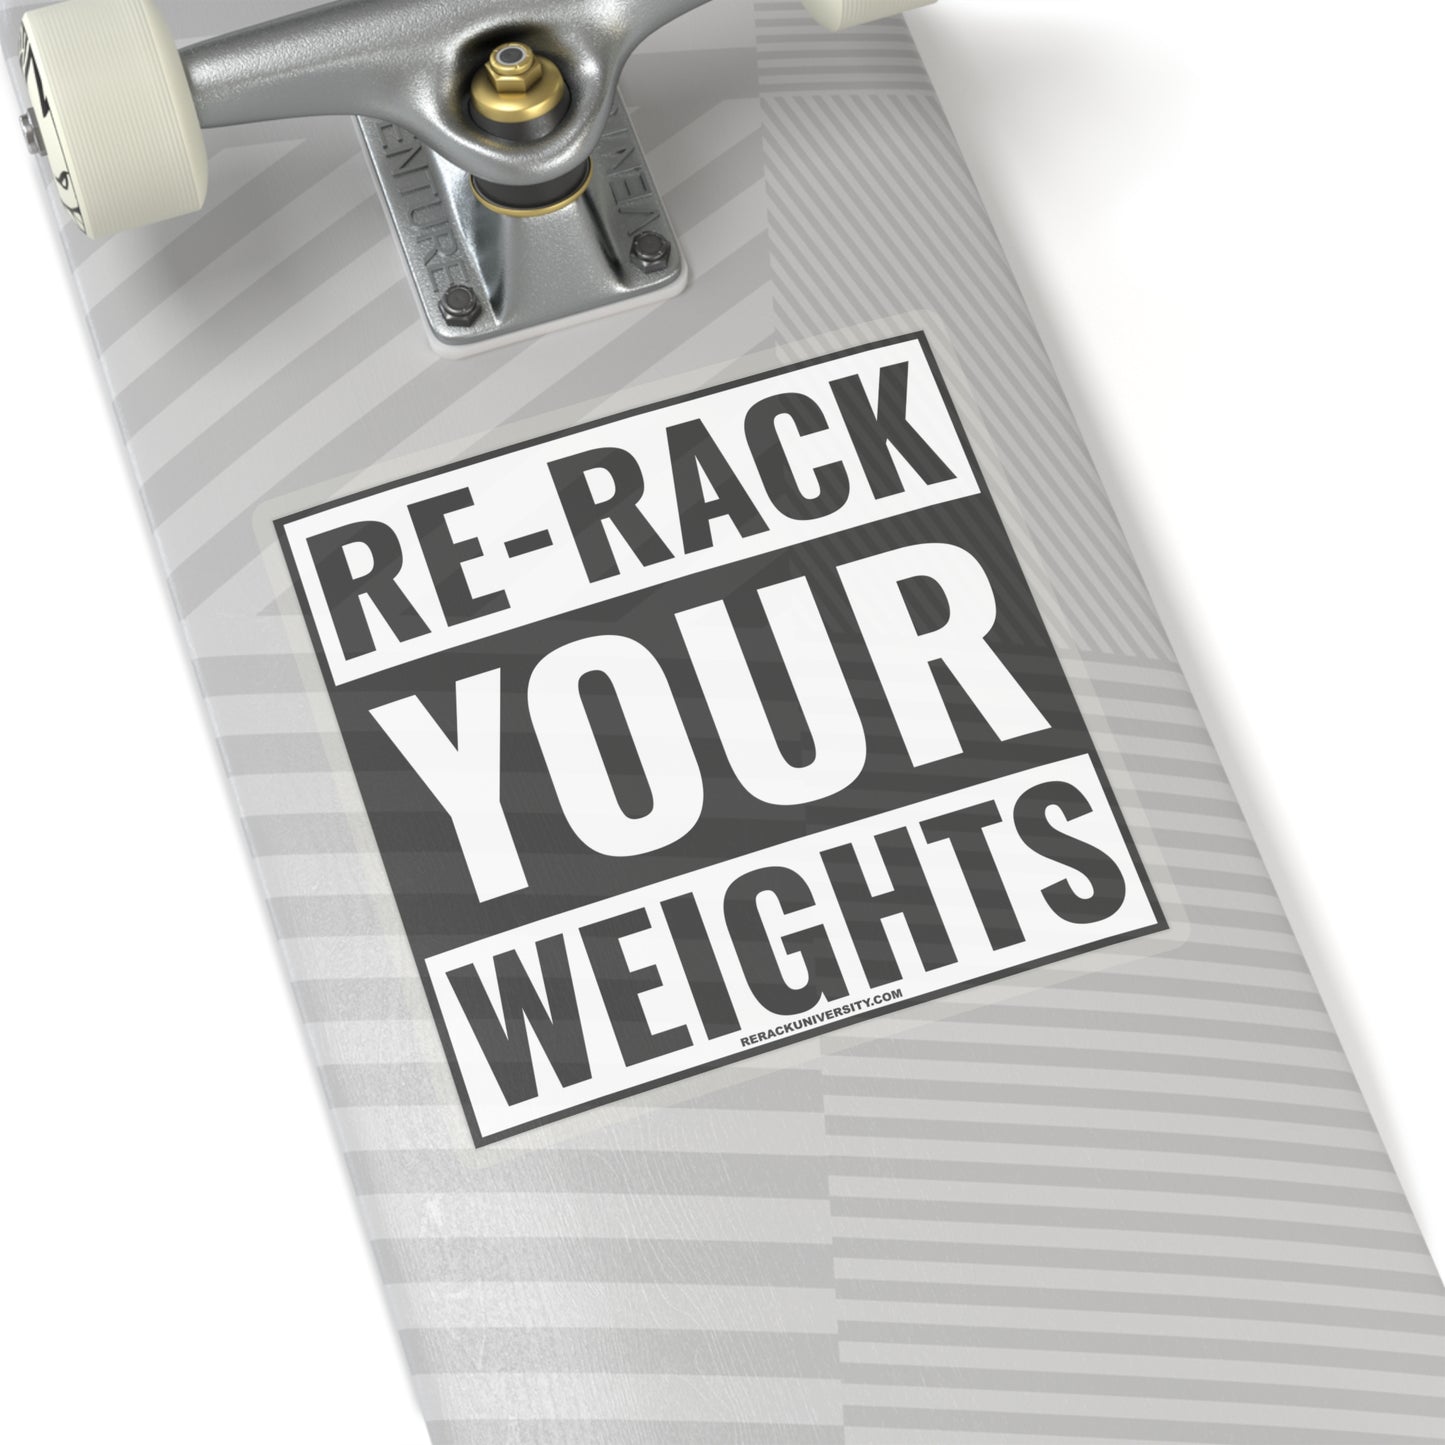 Re-Rack Your Weights Kiss-Cut Stickers